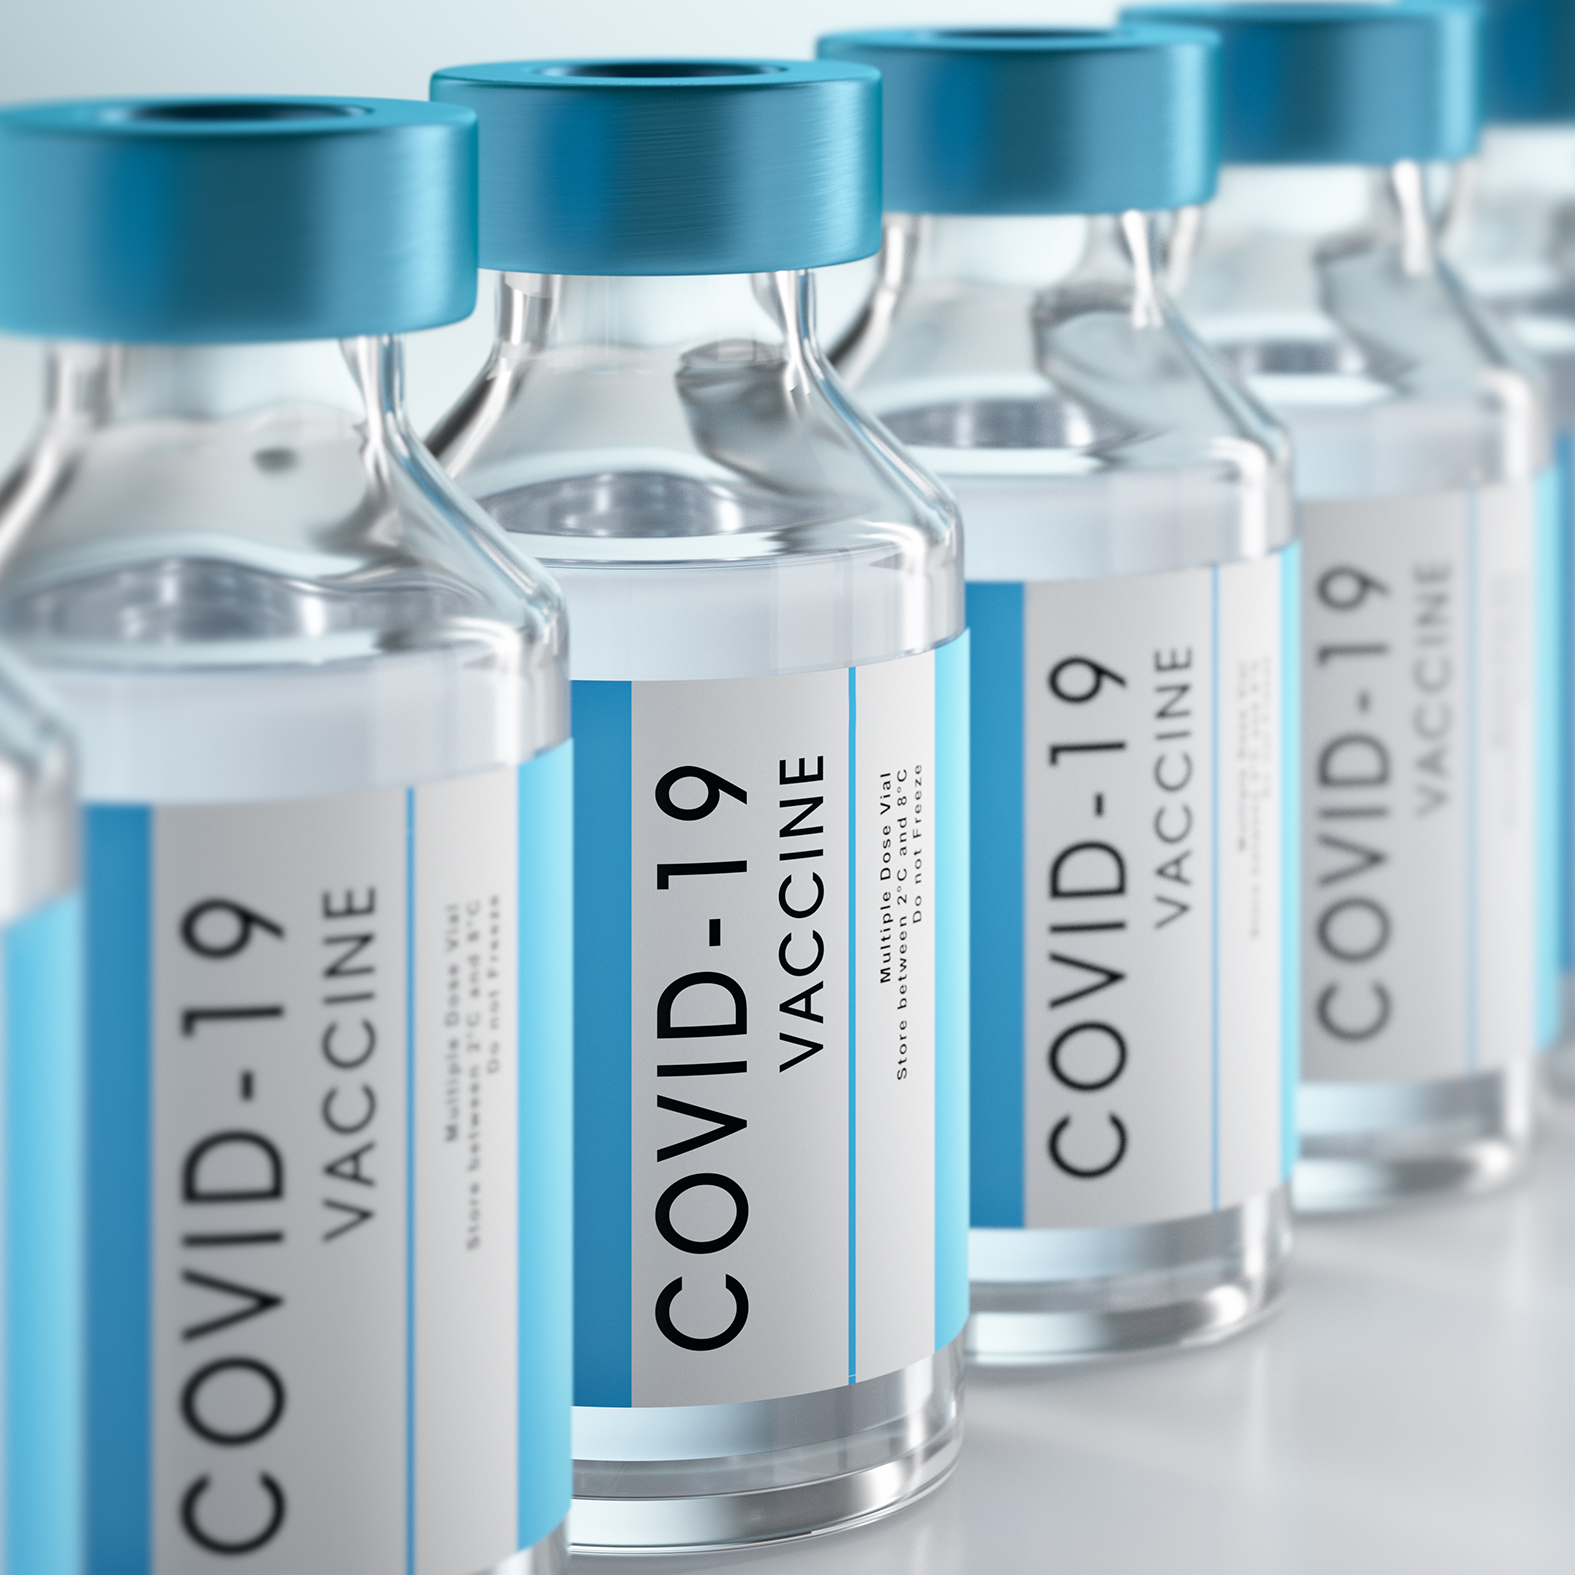 A group of vaccine bottles